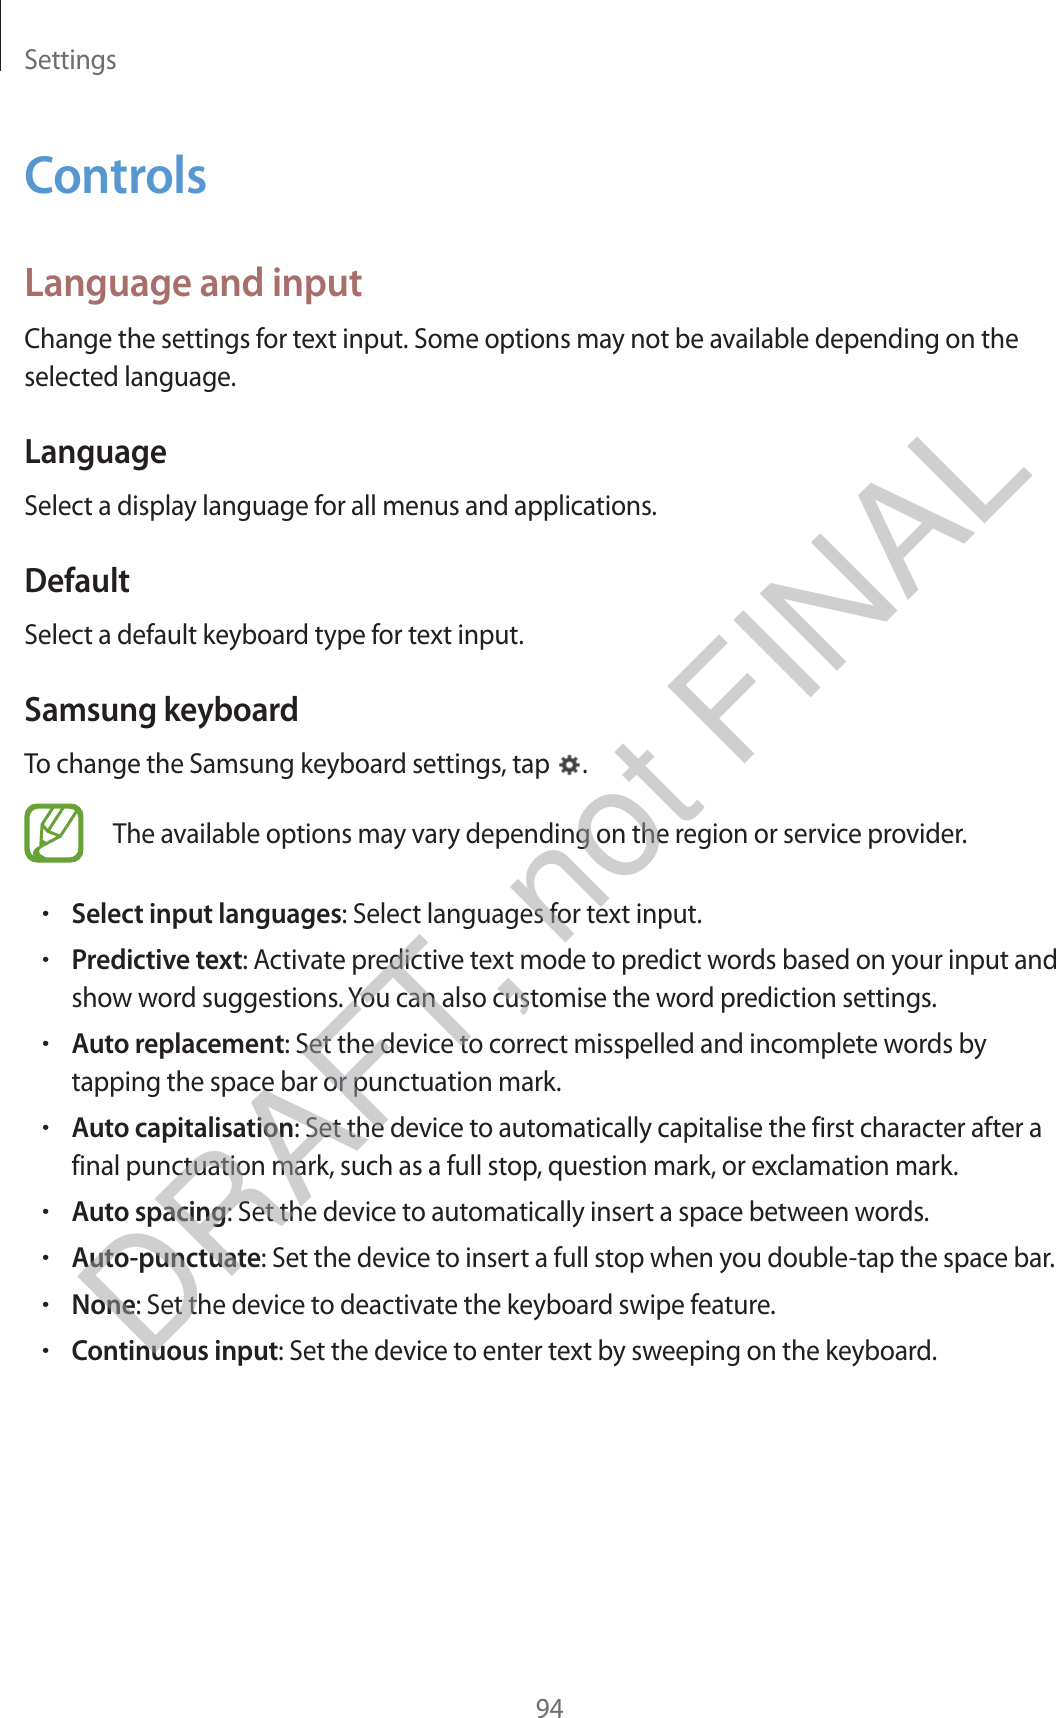 Settings94ControlsLanguage and inputChange the settings for text input. Some options may not be available depending on the selected language.LanguageSelect a display language for all menus and applications.DefaultSelect a default keyboard type for text input.Samsung keyboardTo change the Samsung keyboard settings, tap  .The available options may vary depending on the region or service provider.rSelect input languages: Select languages for text input.rPredictive text: Activate predictive text mode to predict words based on your input and show word suggestions. You can also customise the word prediction settings.rAuto replacement: Set the device to correct misspelled and incomplete words by tapping the space bar or punctuation mark.rAuto capitalisation: Set the device to automatically capitalise the first character after a final punctuation mark, such as a full stop, question mark, or exclamation mark.rAuto spacing: Set the device to automatically insert a space between words.rAuto-punctuate: Set the device to insert a full stop when you double-tap the space bar.rNone: Set the device to deactivate the keyboard swipe feature.rContinuous input: Set the device to enter text by sweeping on the keyboard.DRAFT, not FINAL